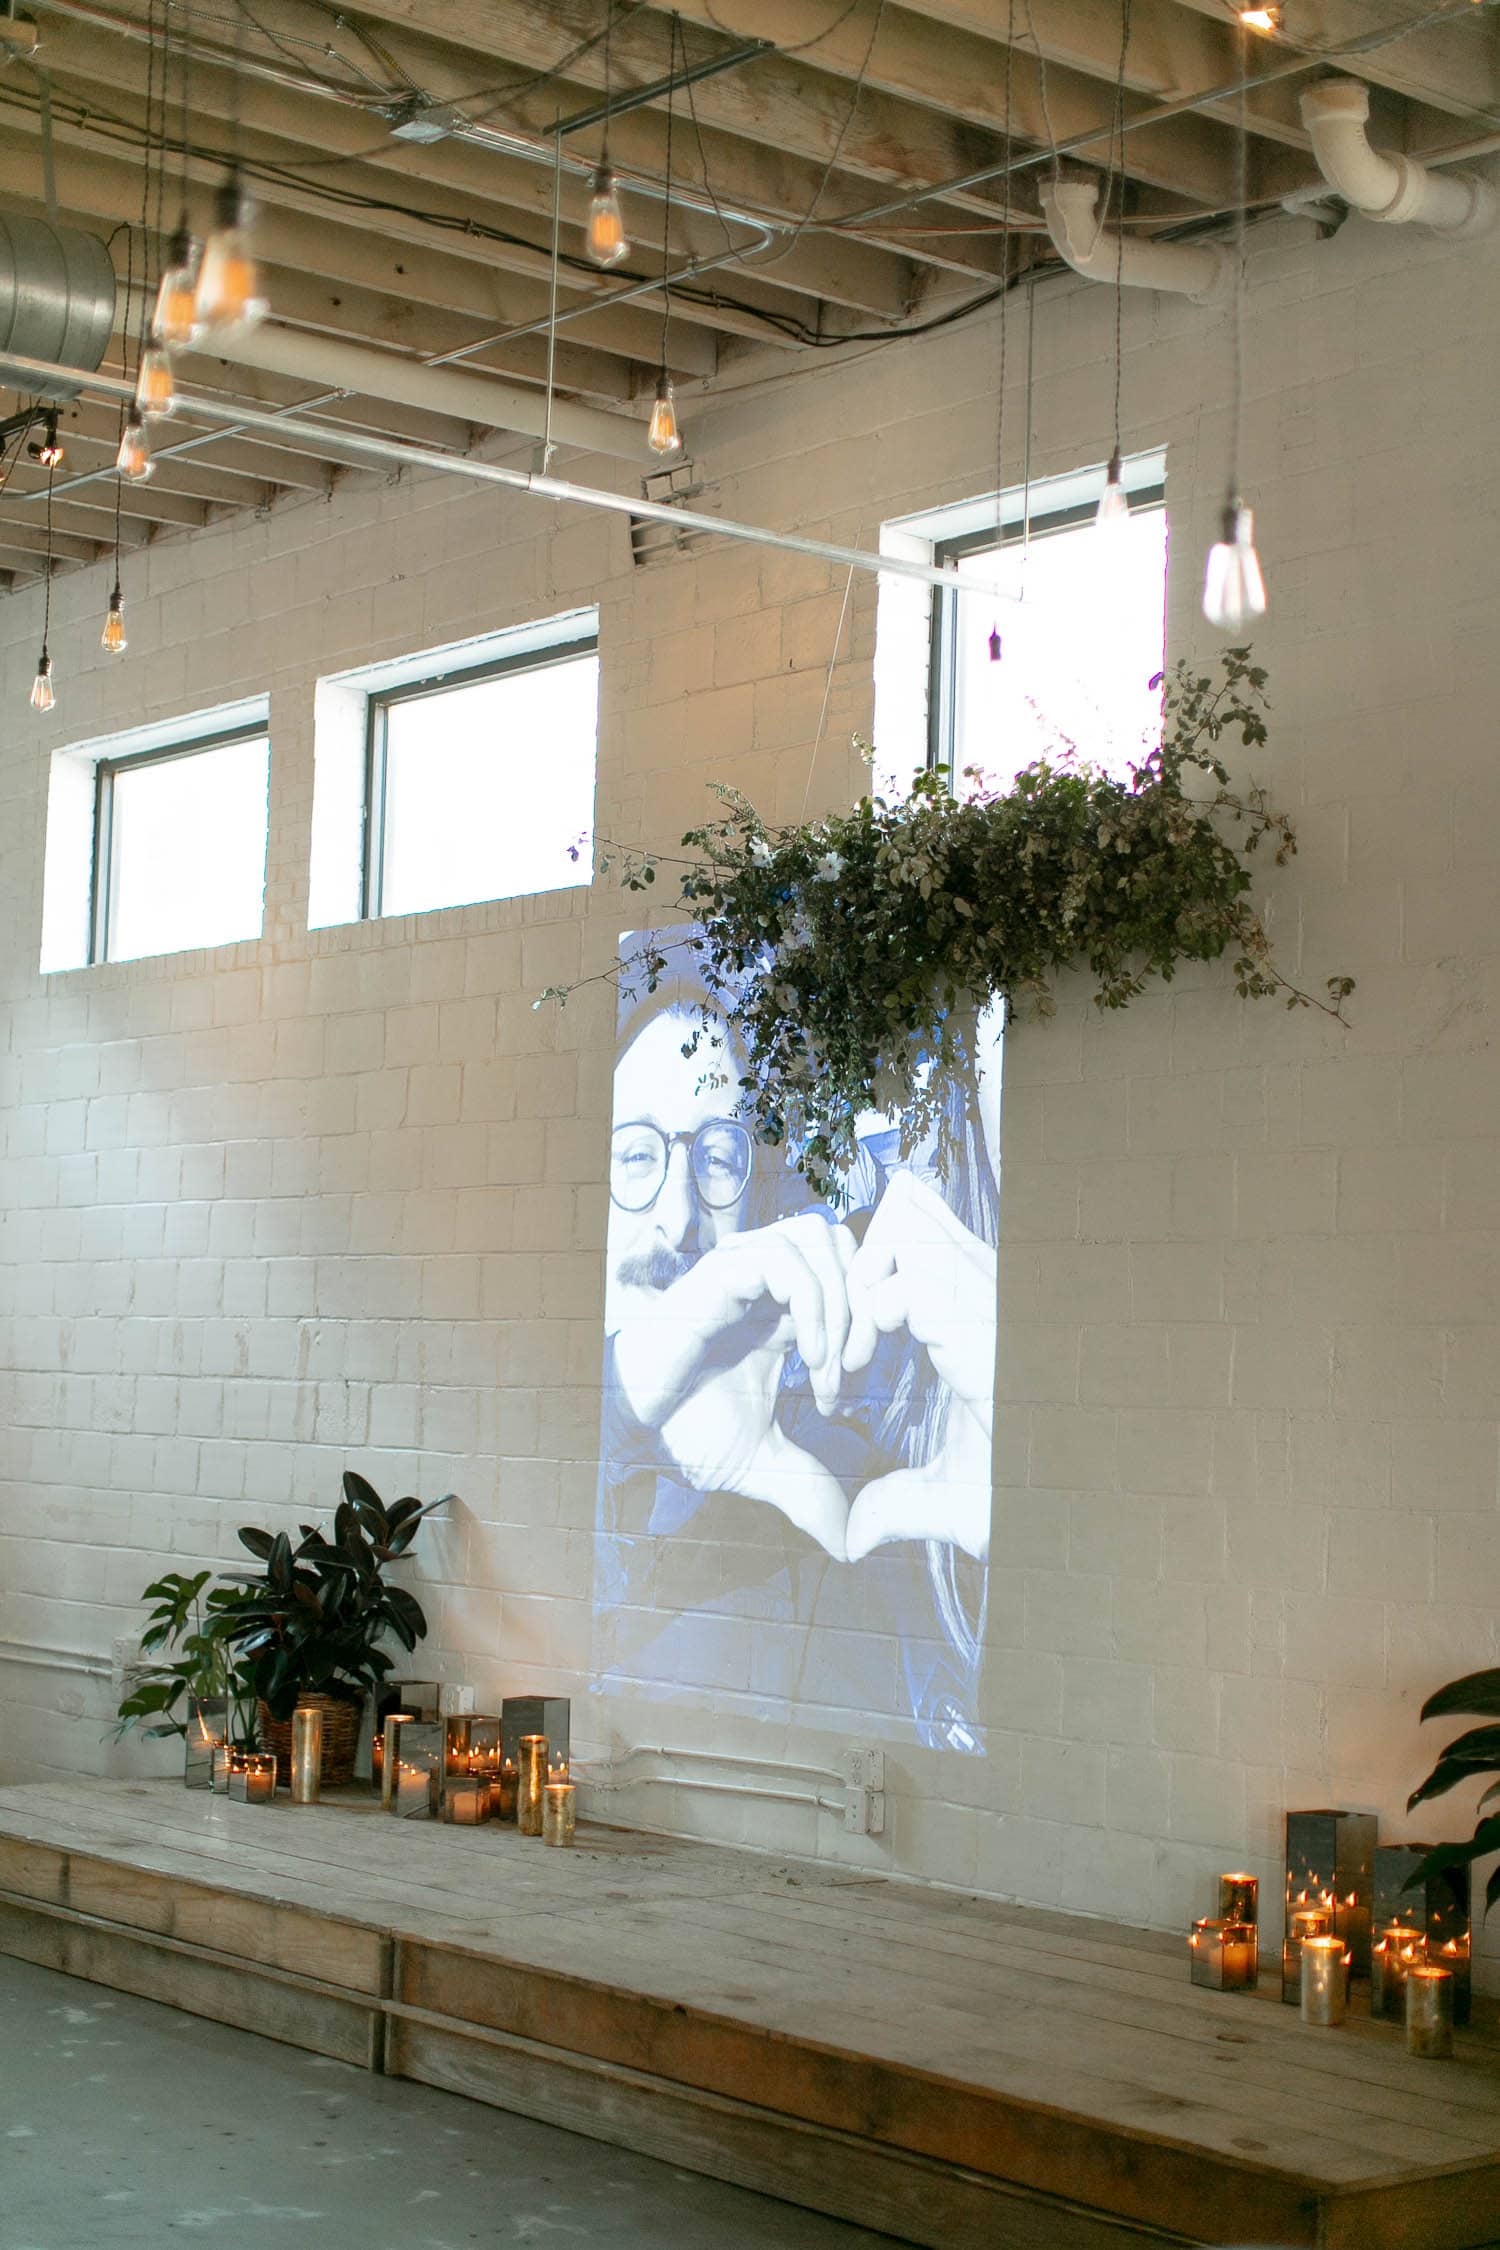 A wedding ceremony stage has houseplants all around, adding to the white and greenery wedding theme. There is a projection of photos of the couple on the wall.